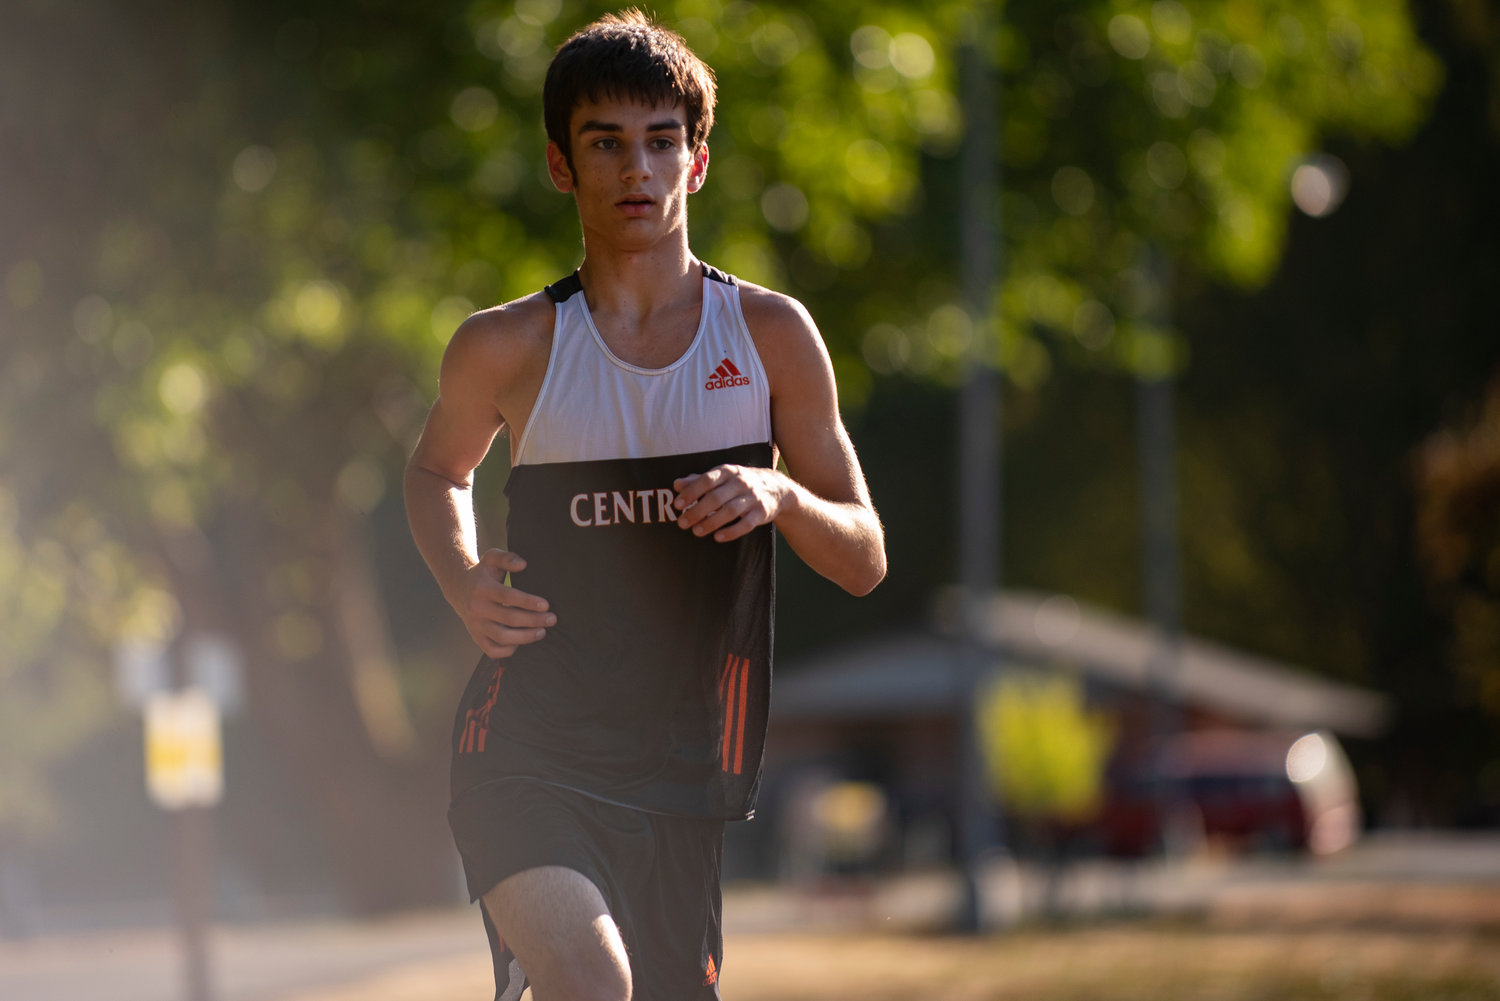 Centralia's Jacob Cooper competes during a dual meet with W.F. West on Wednesday.